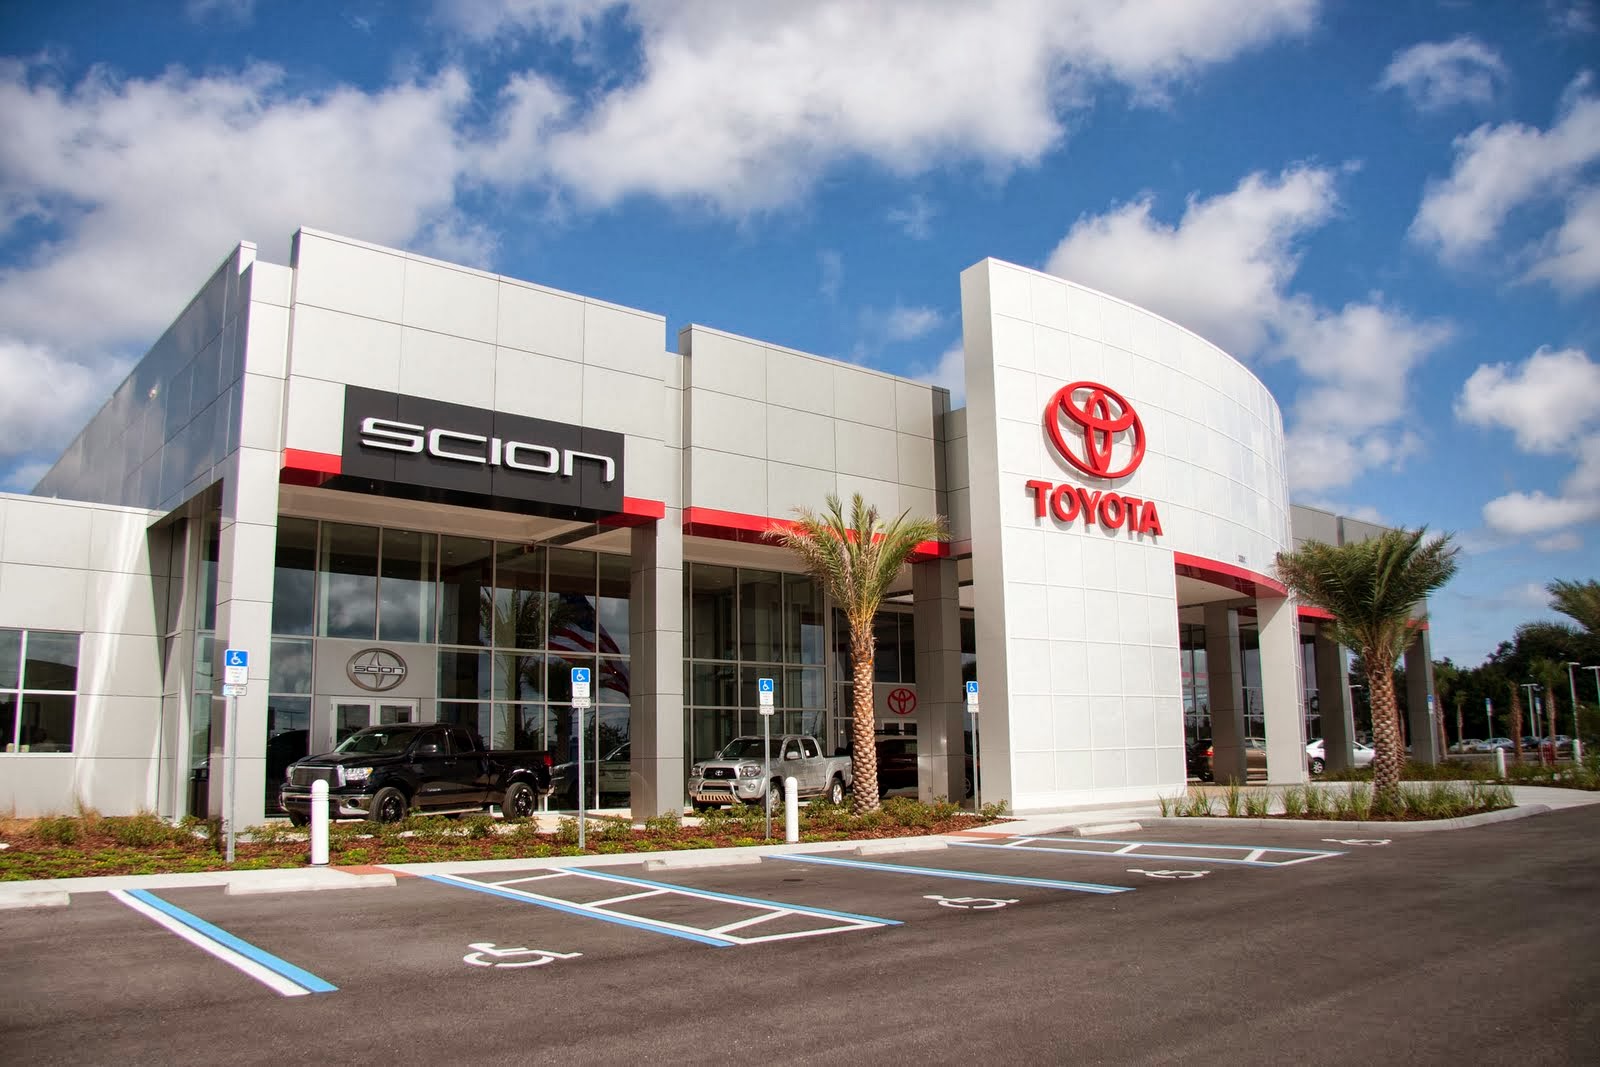 Toyota Dealership Coming to Brownsville, SpaceX Project Delayed